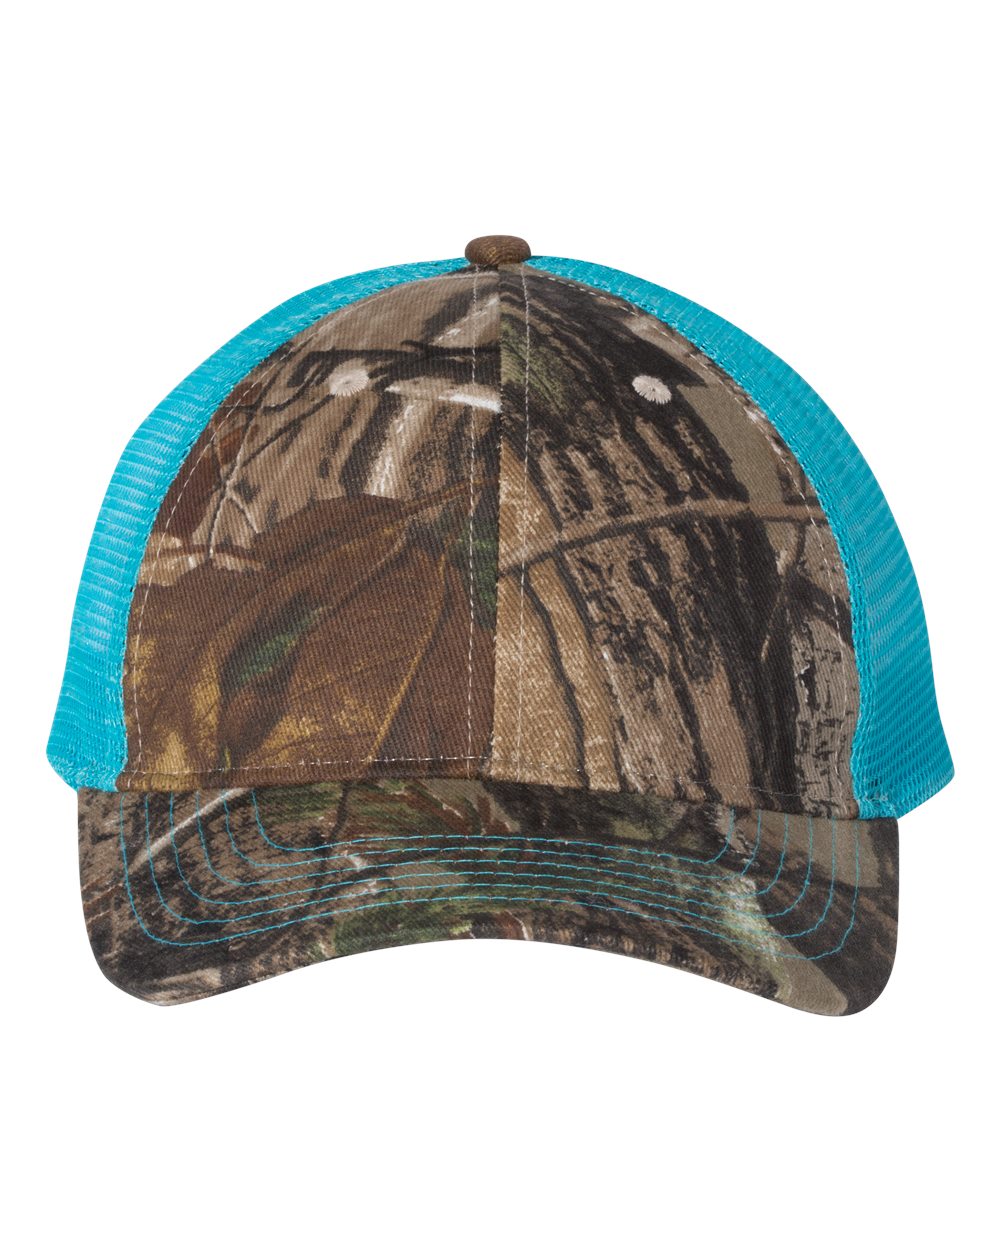 click to view Realtree AP/ Neon Blue